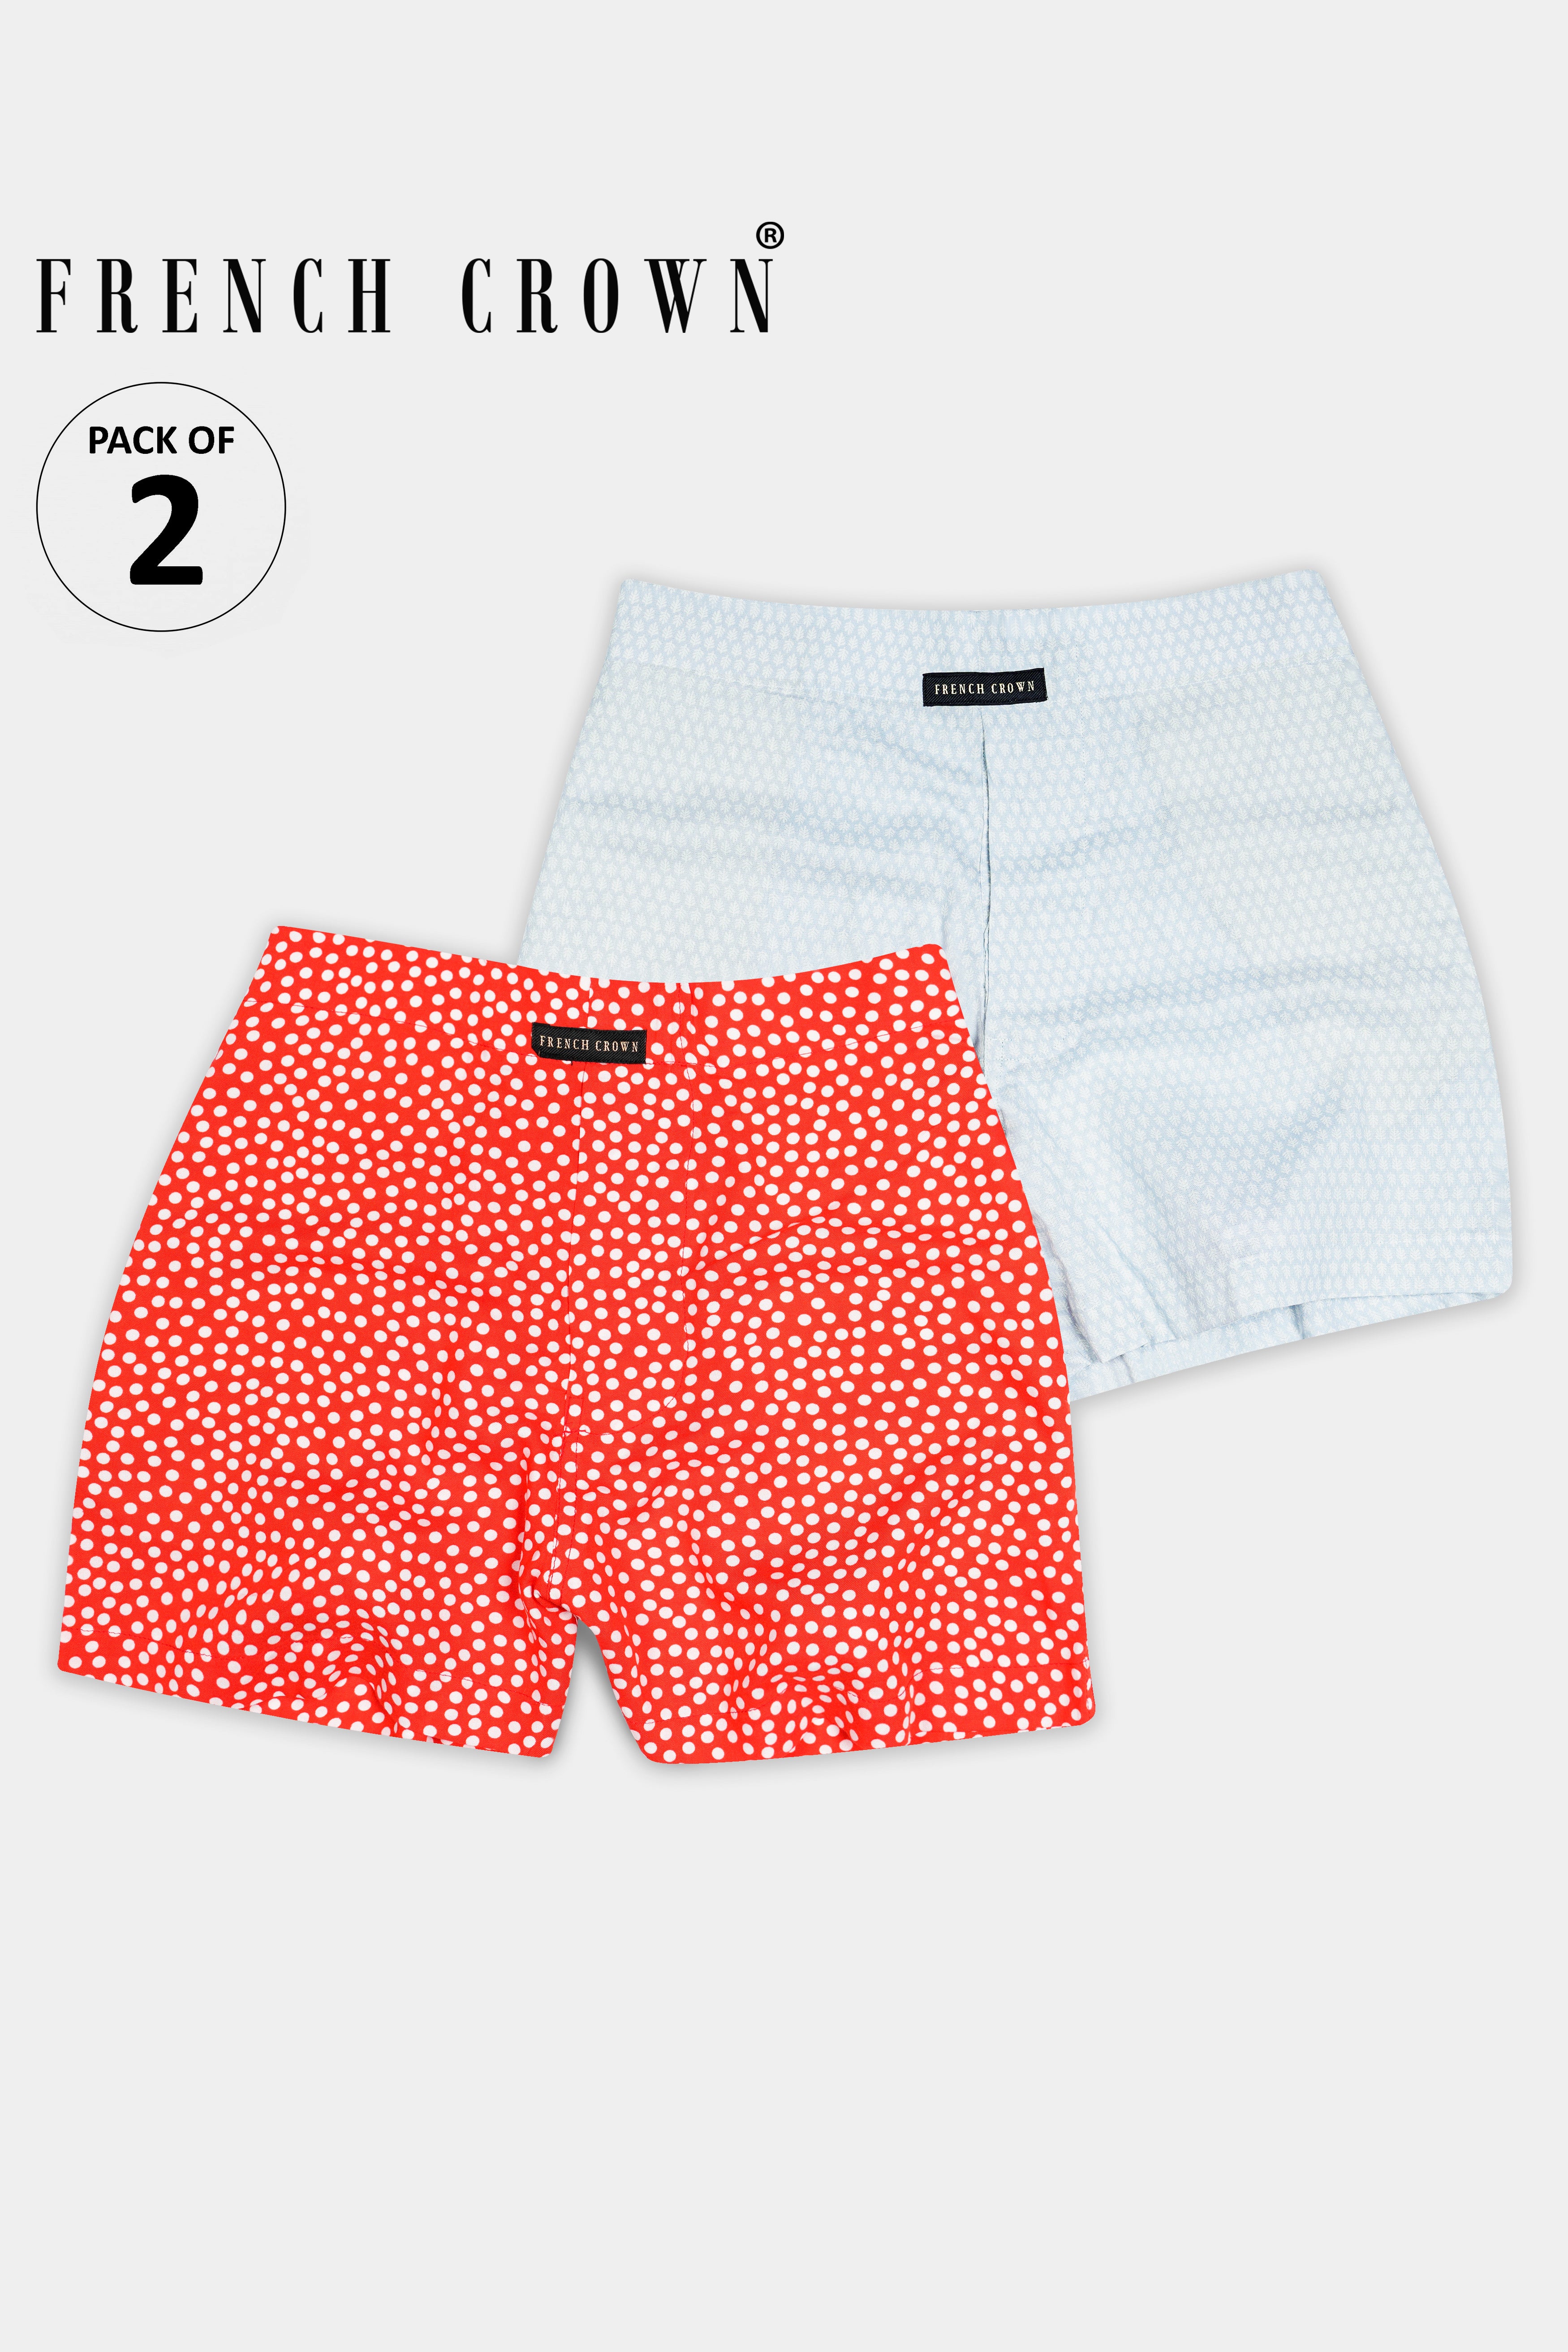 Edgewater Blue Textured Premium Cotton and Cornell Red Polka Dotted Premium Tencel Boxers BX563-BX526-28, BX563-BX526-30, BX563-BX526-32, BX563-BX526-34, BX563-BX526-36, BX563-BX526-38, BX563-BX526-40, BX563-BX526-42, BX563-BX526-44